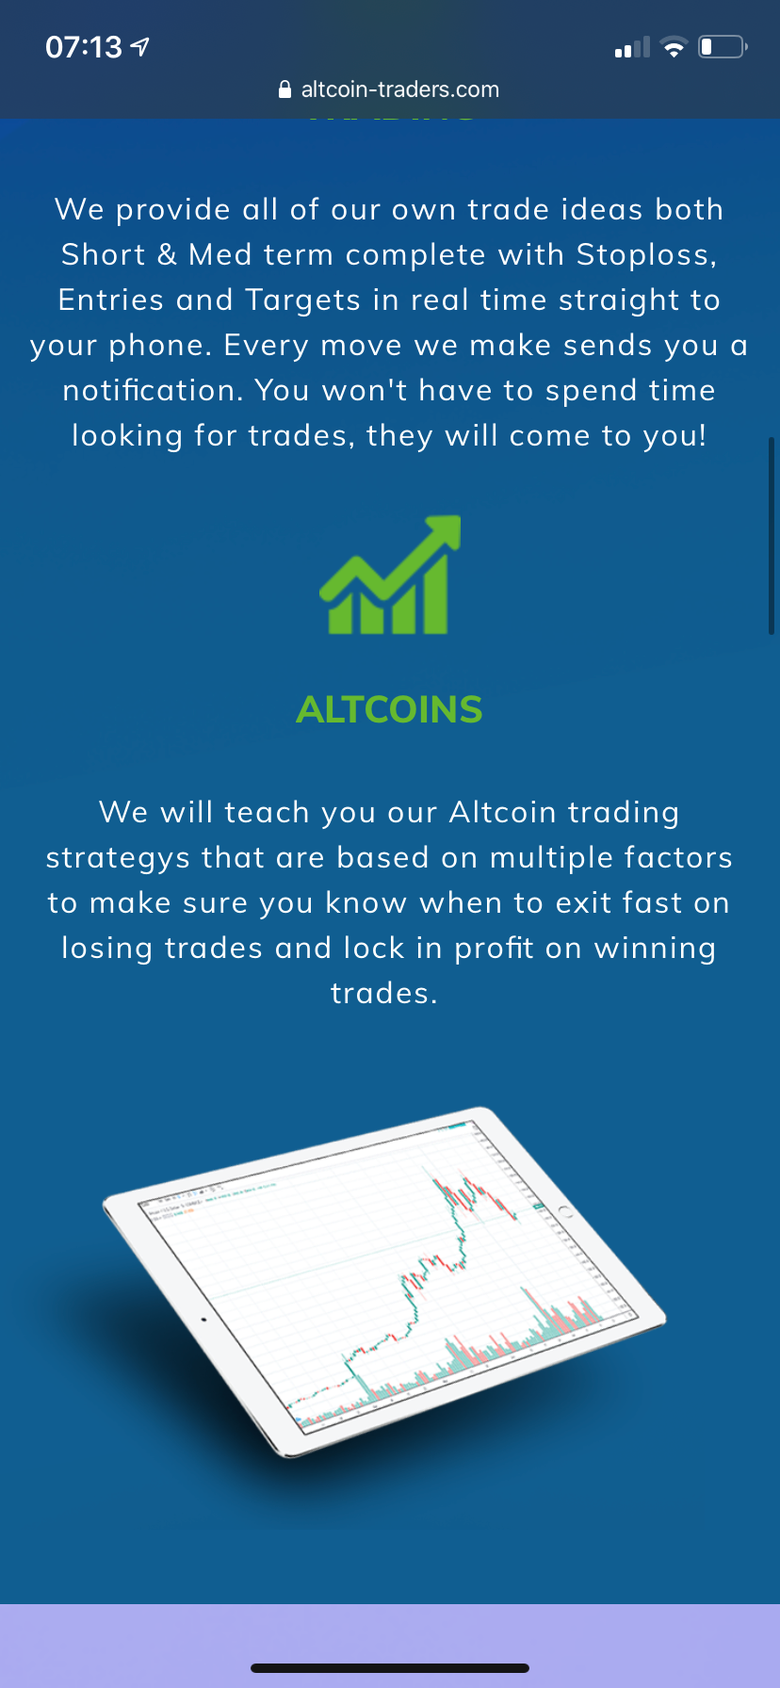 https://www.altcoin-traders.com/